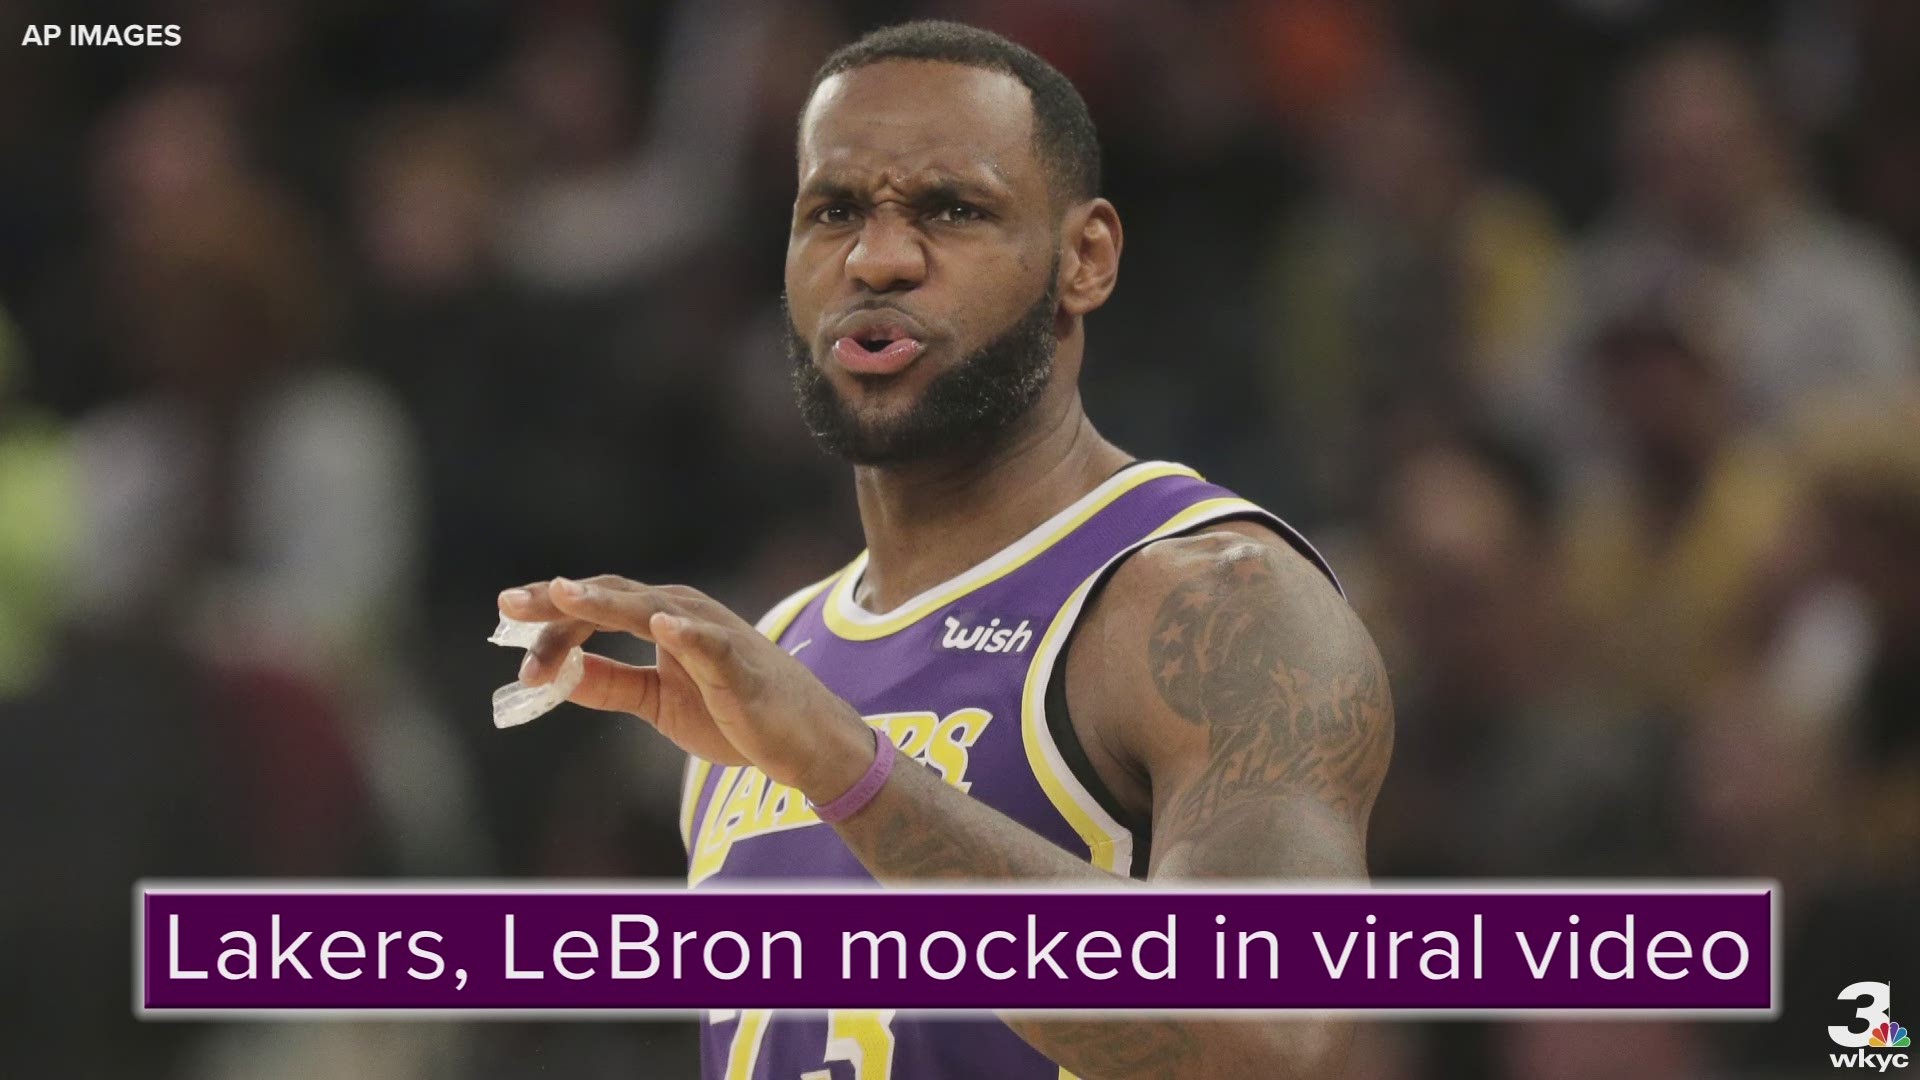 LeBron James’ first season with the Los Angeles Lakers has been a struggle...in more ways than one.